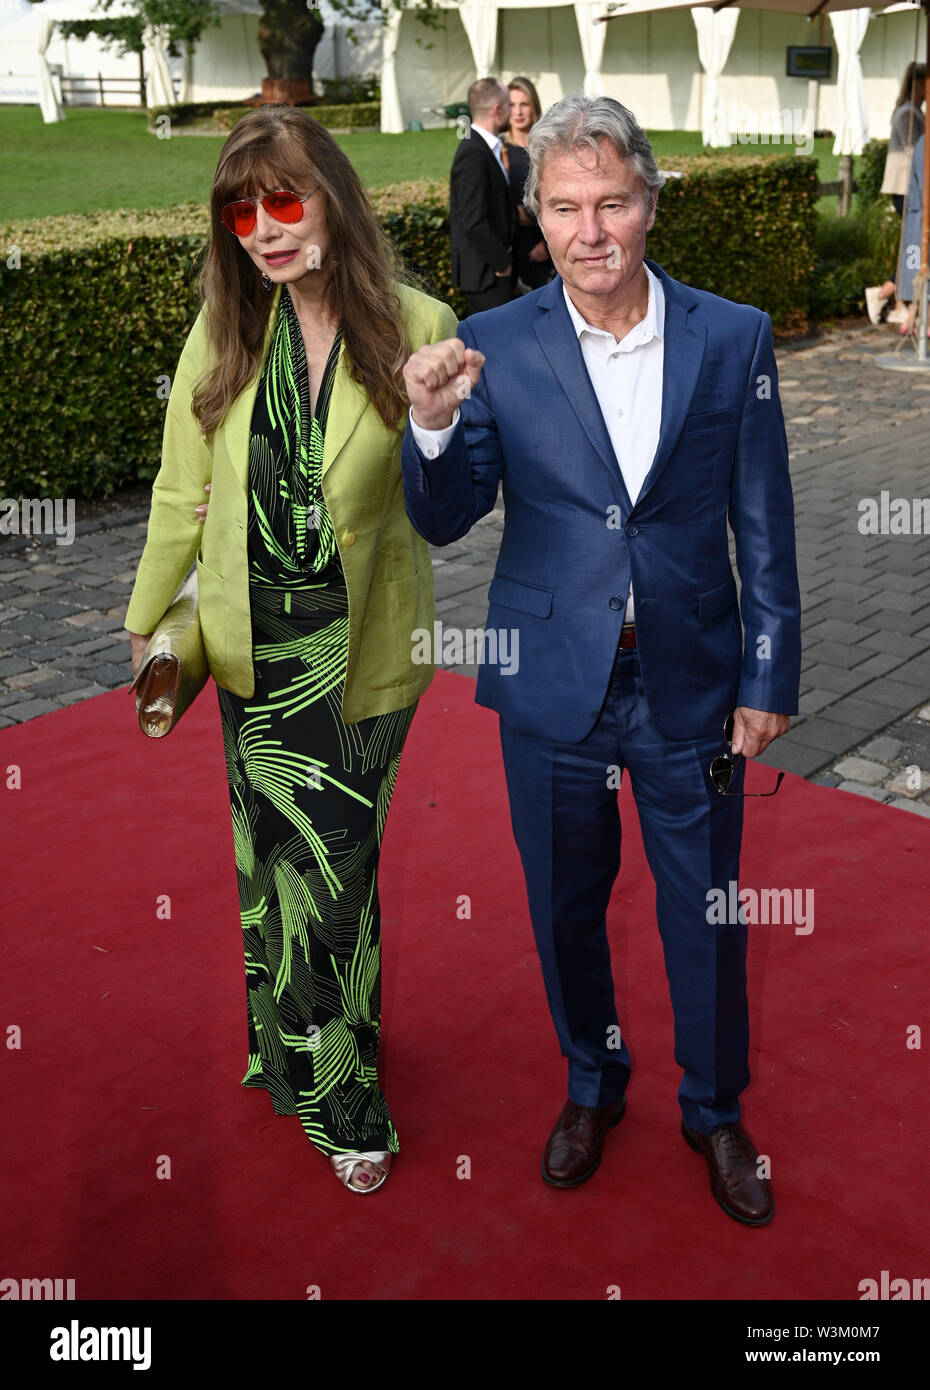 Cologne, Germany. 16th July, 2019. The actor John Savage (r) and her companion come to the MediaNight at the CHIO equestrian tournament. Credit: Henning Kaiser/dpa/Alamy Live News Stock Photo